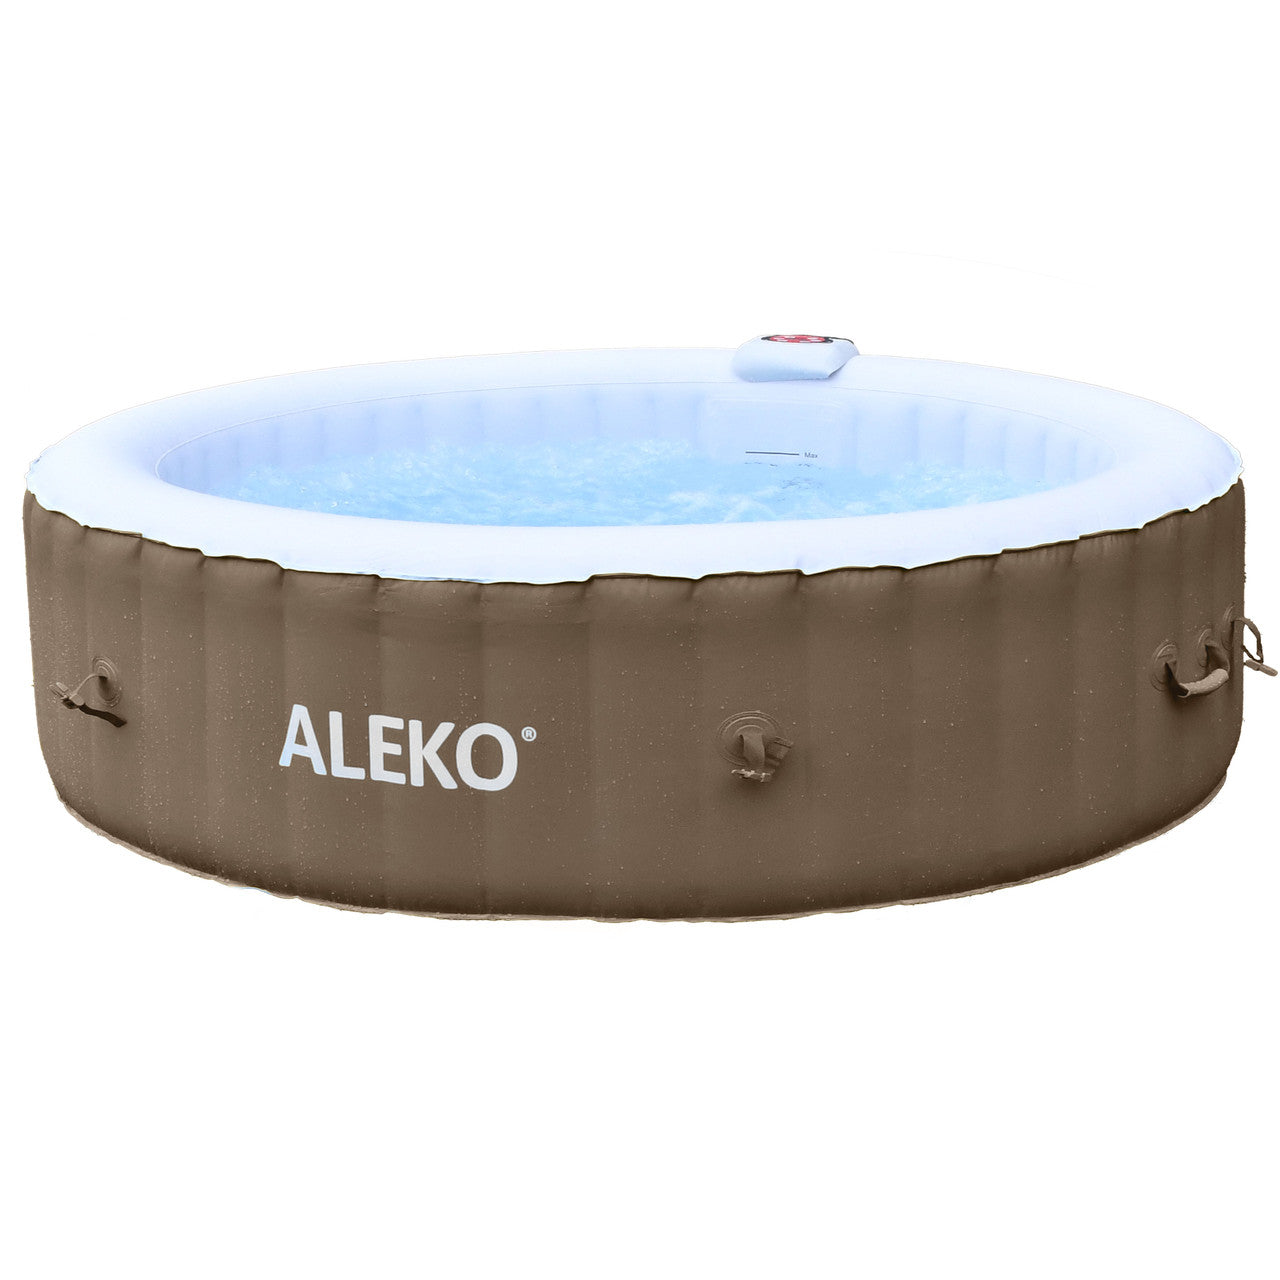 Aleko Round Inflatable Jetted Hot Tub with Cover - 6 Person - 265 Gallon - Brown and White HTIR6BRW-AP - Serenity Provision